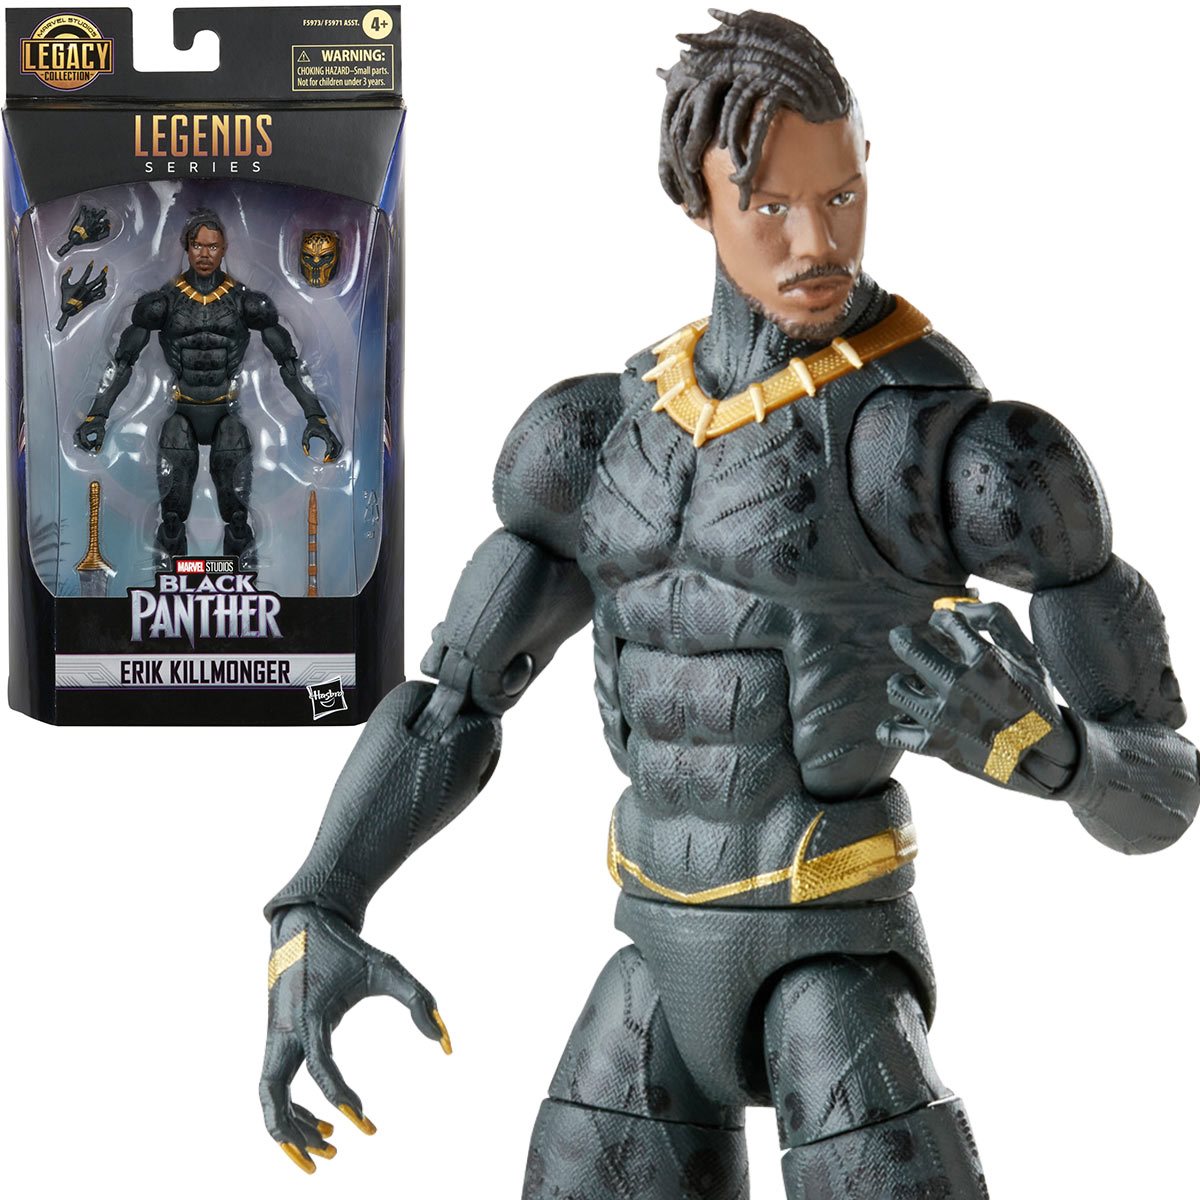 Marvel Legends 6-Inch Series Black Panther Exclusive Action Figure Hasbro Toys